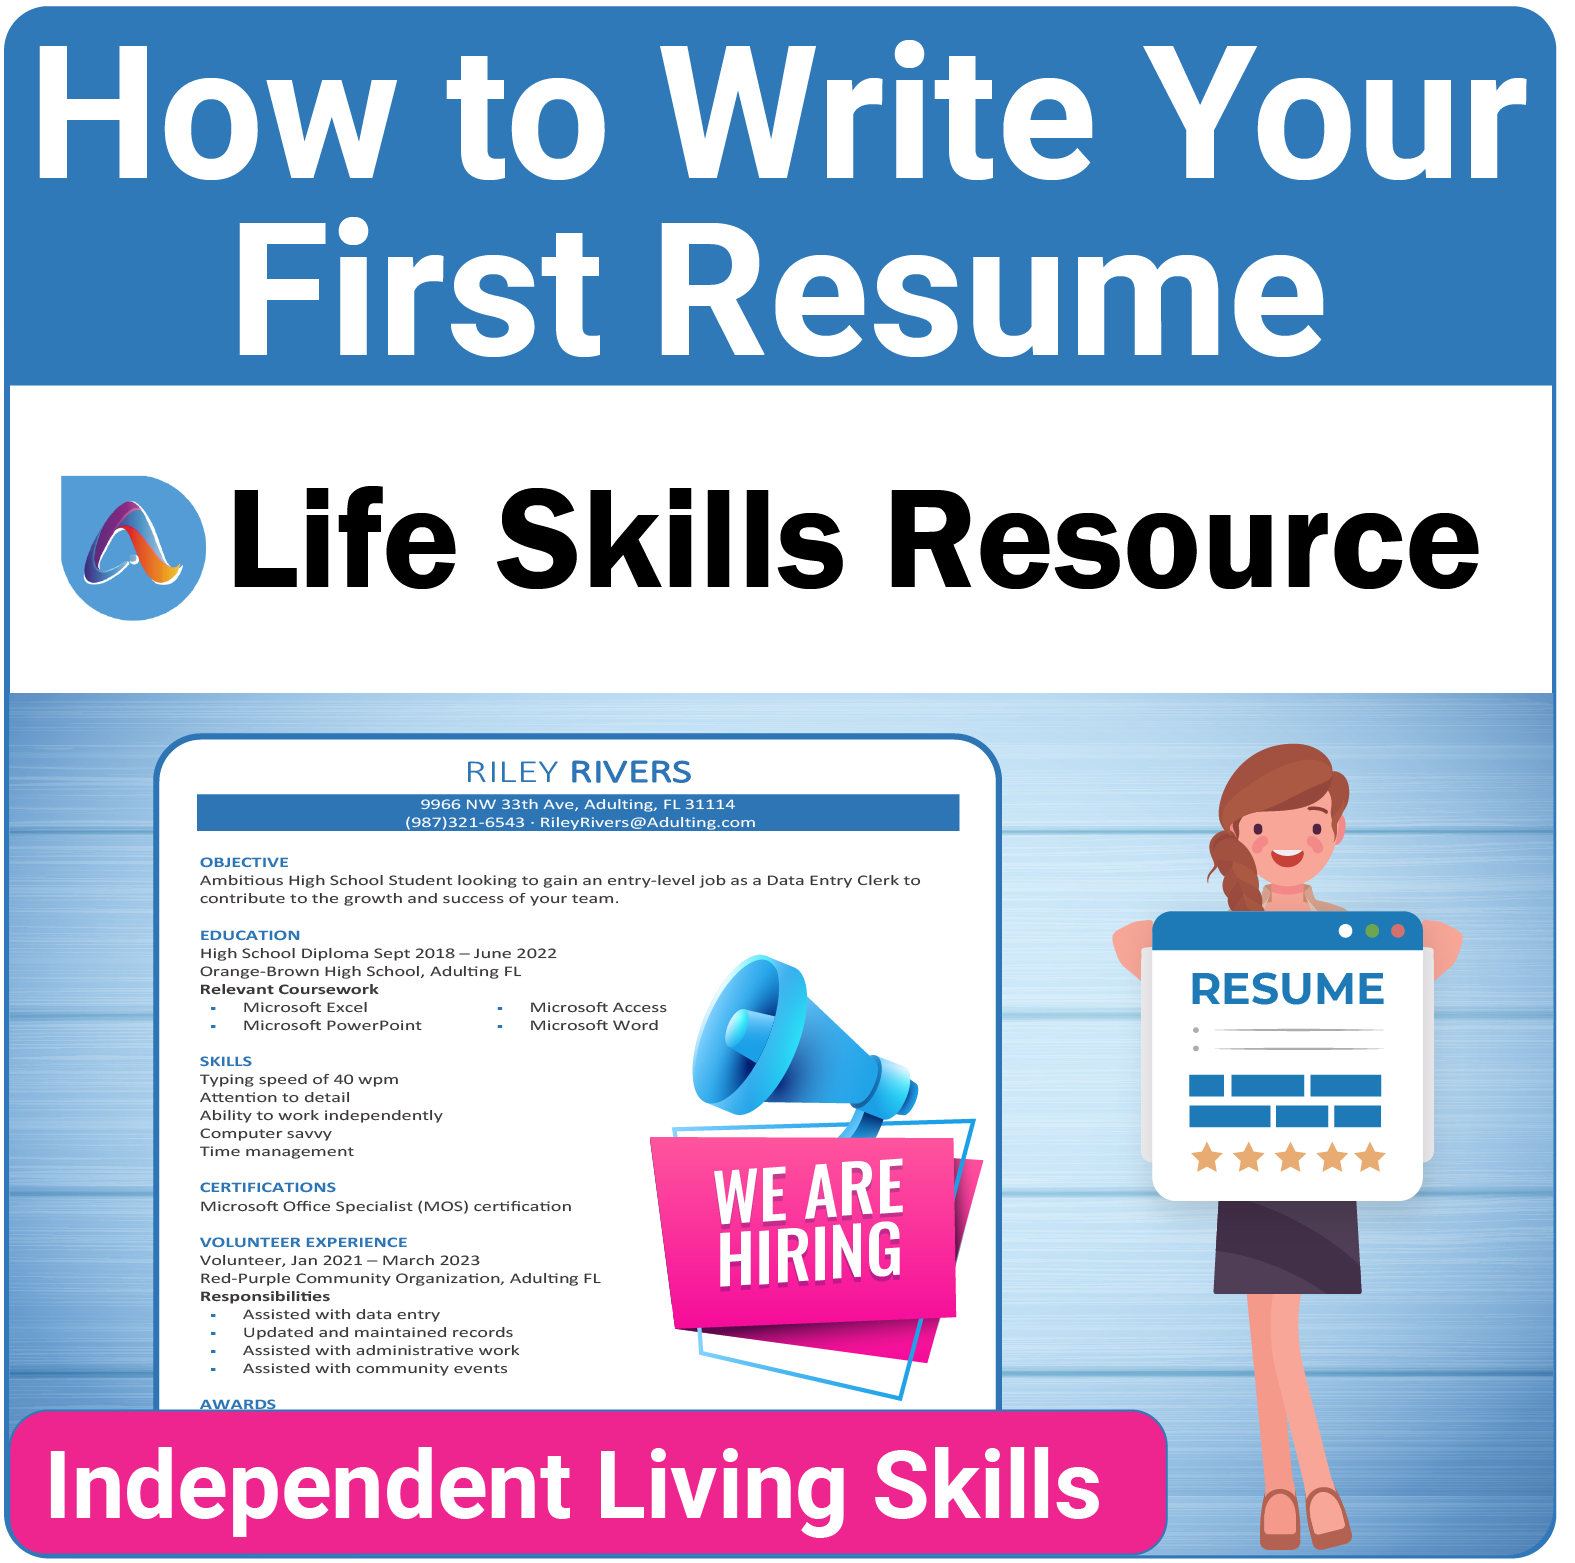 Essential Employment Skills Activity for Teens - How to Write Your First Resume